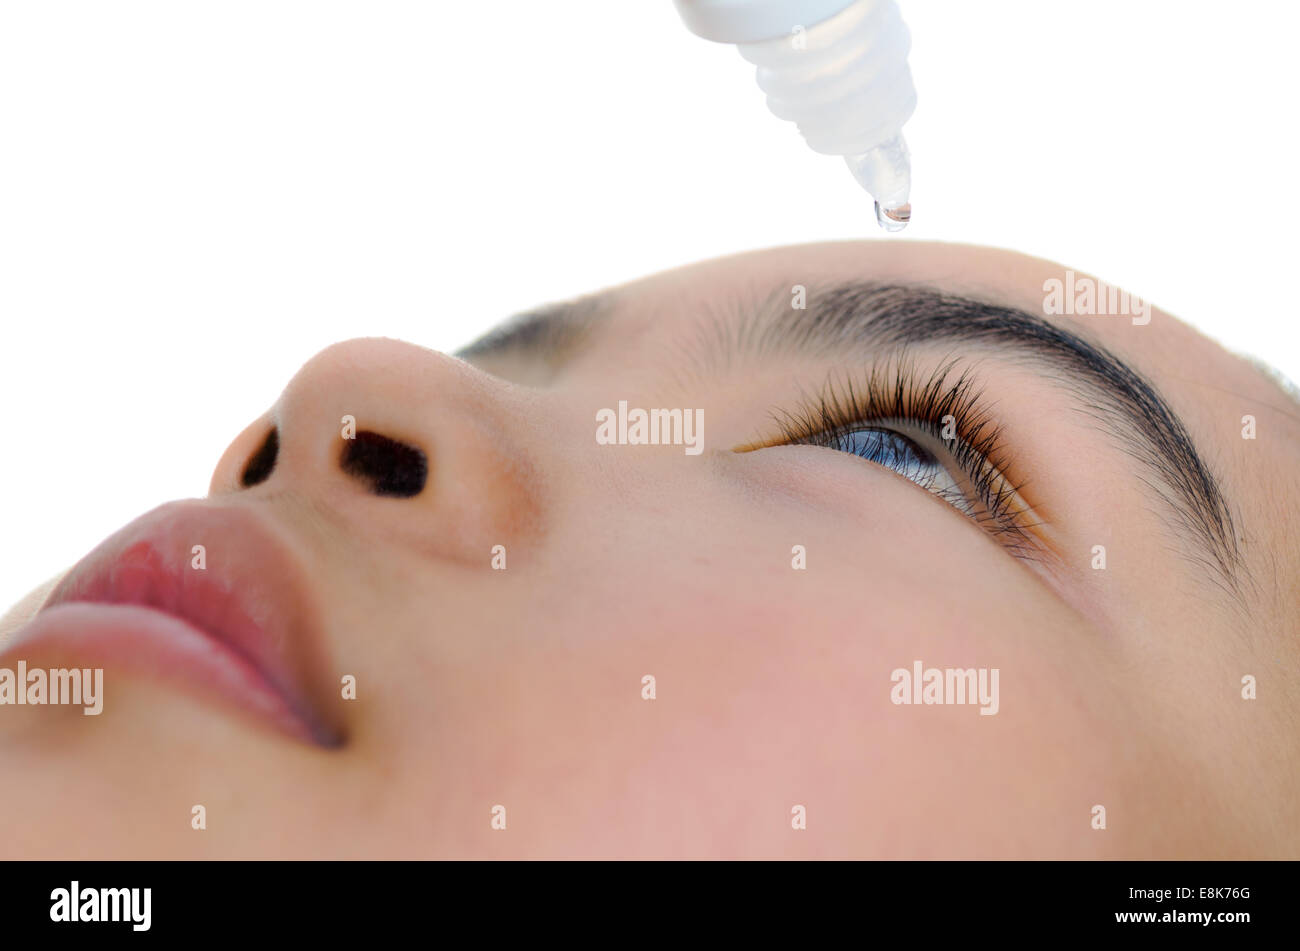 Young girl takes care of her eyes with eye drops. Stock Photo